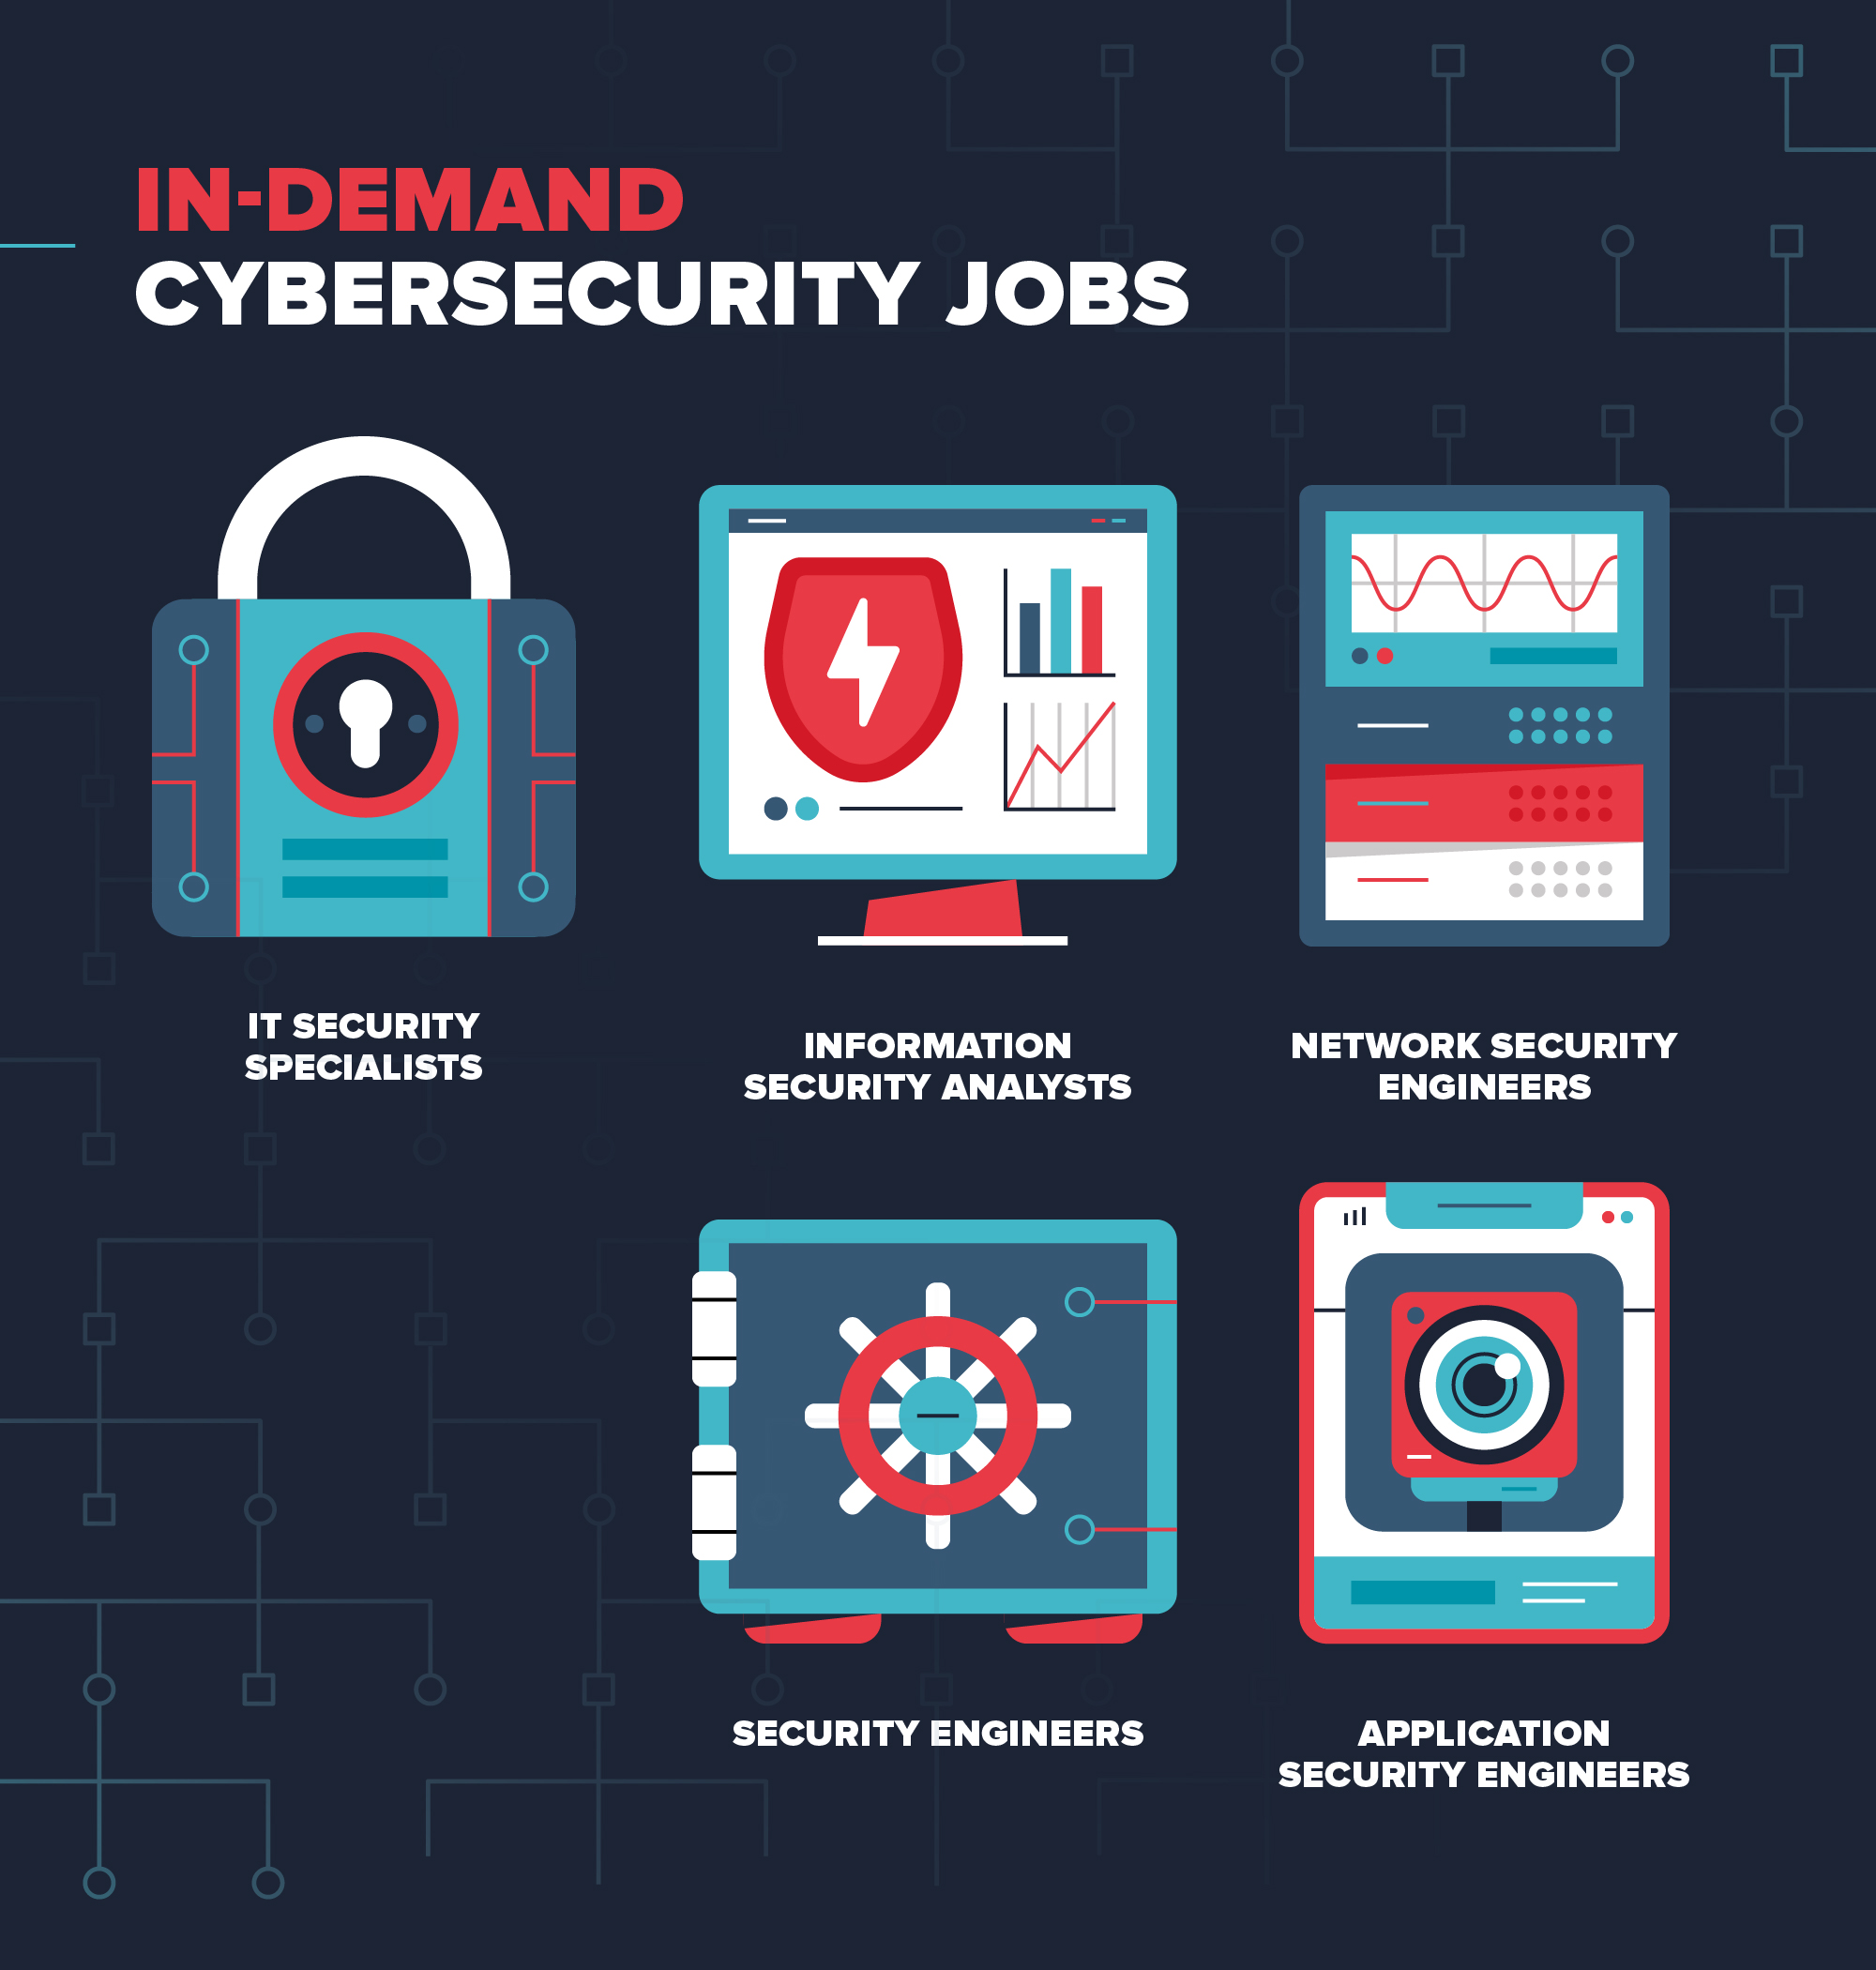 illustrations of the most In-Demand Cybersecurity Jobs: IT security specialists, Information security analysts Network security engineers Security engineers Application security engineers